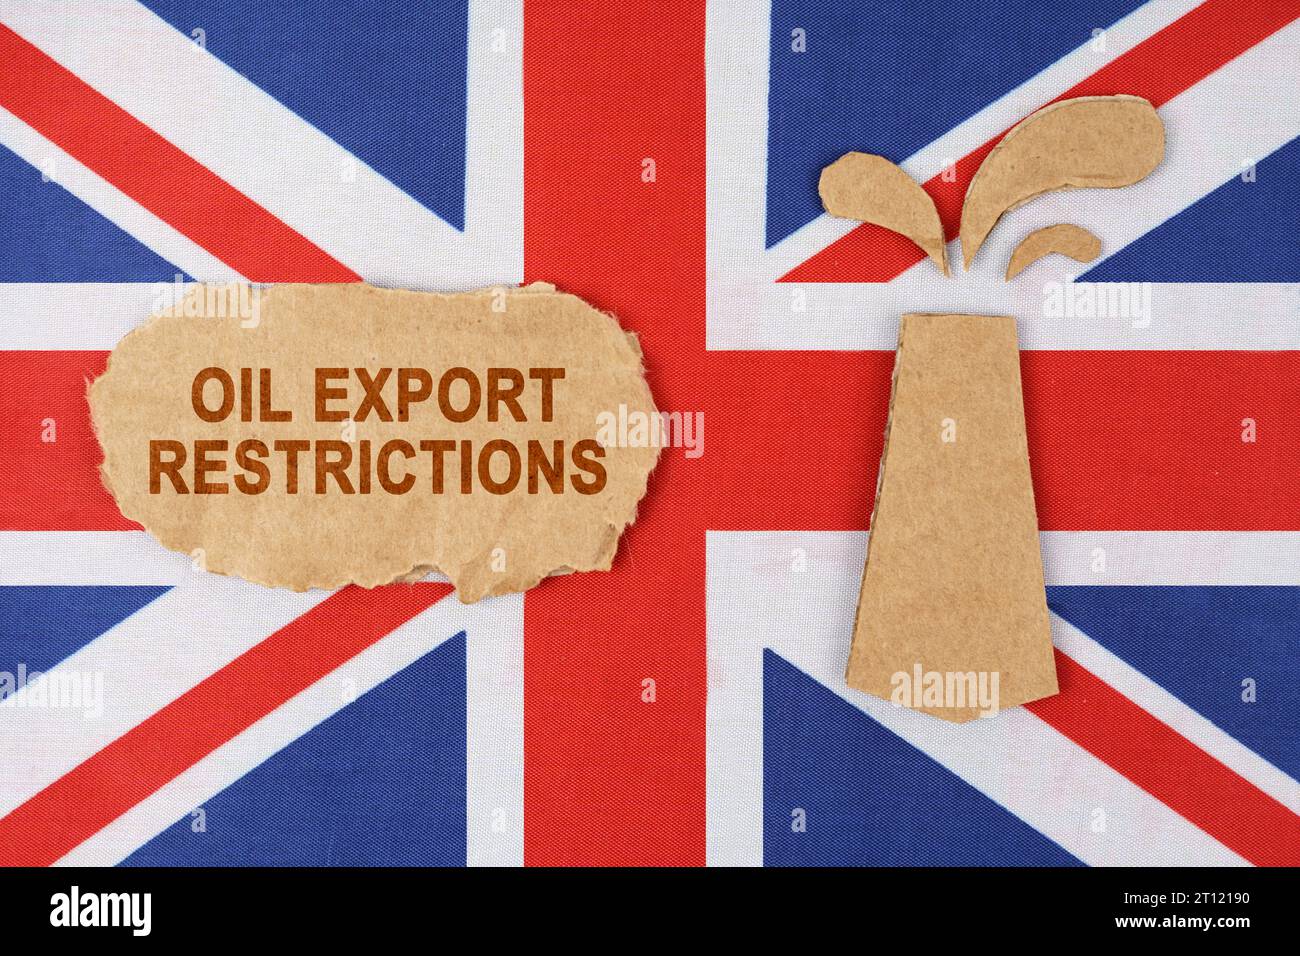 On the flag of Great Britain there is an oil rig cut out of cardboard and a sign with the inscription - oil export restrictions. Stock Photo